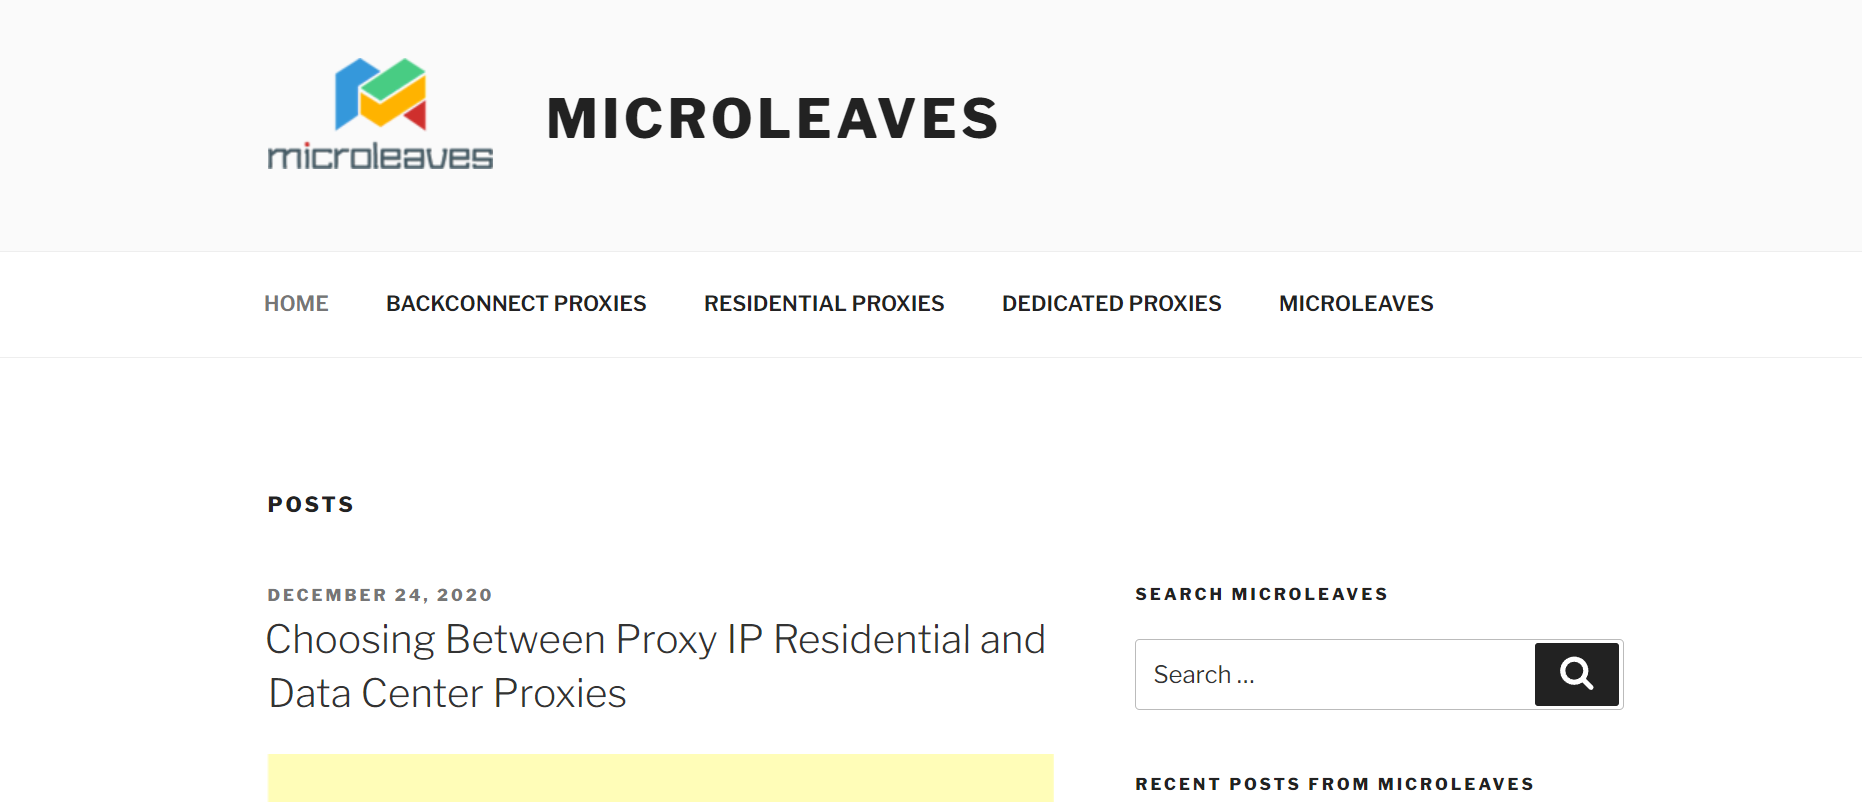 Microleaves